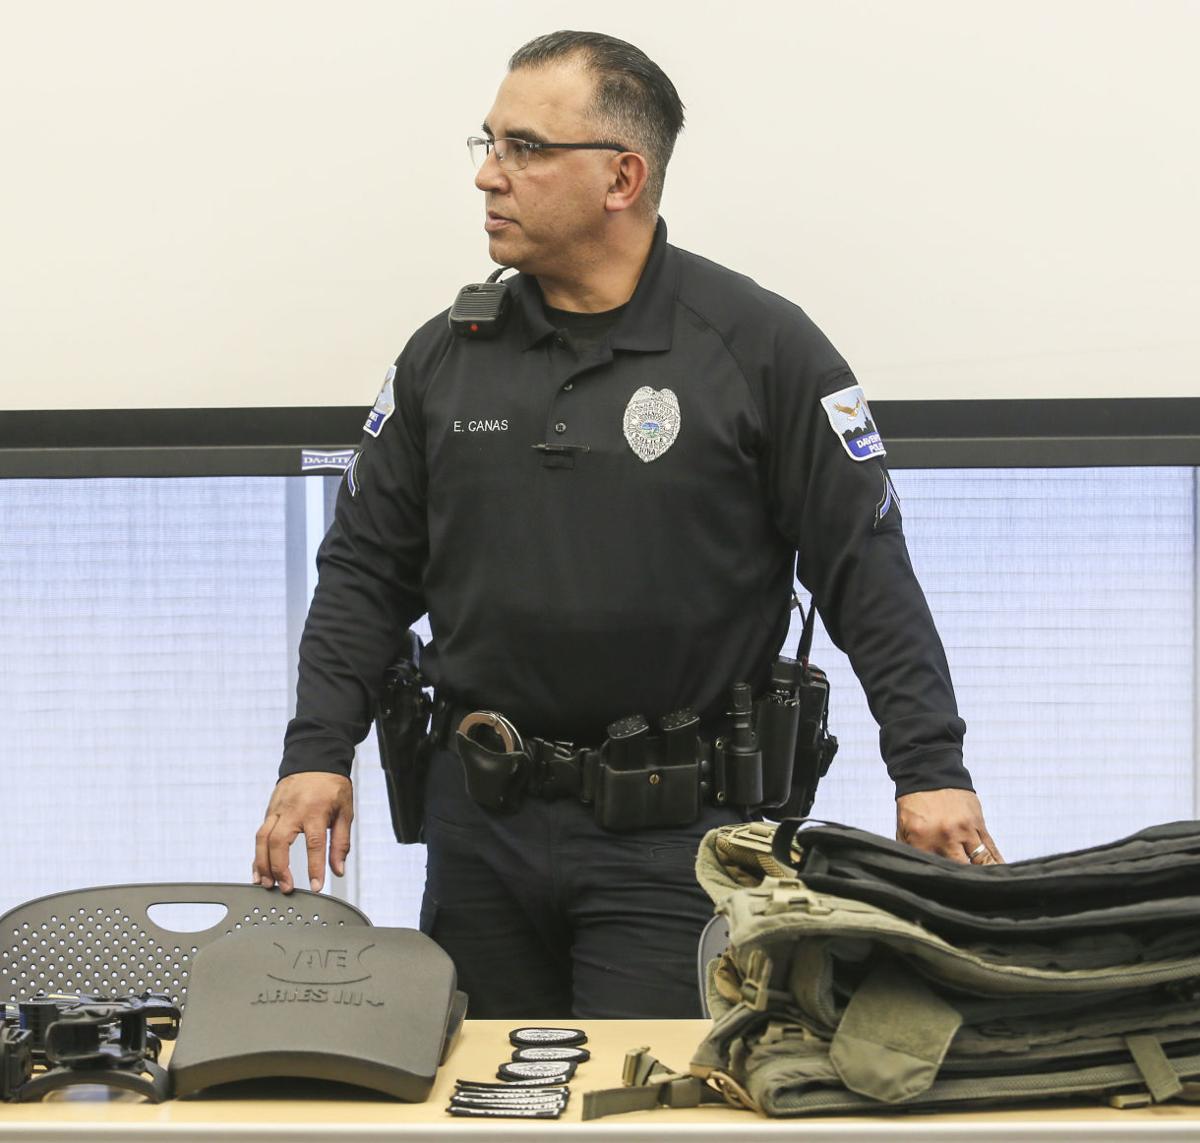 Davenport police officer collects equipment to outfit Savoonga, Alaska ...